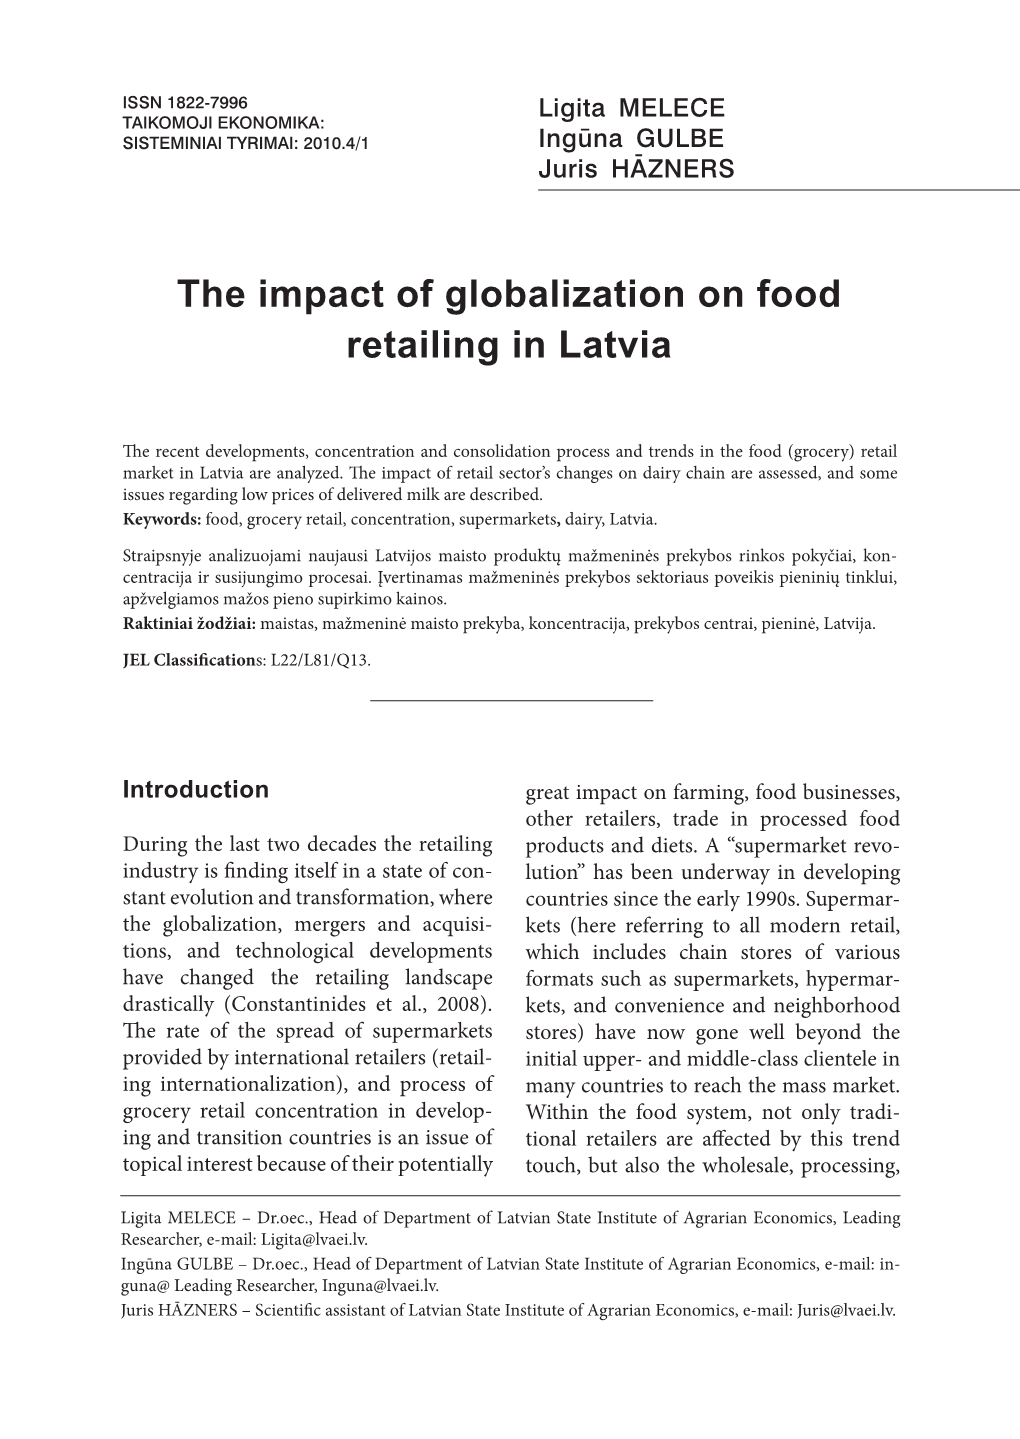 The Impact of Globalization on Food Retailing in Latvia